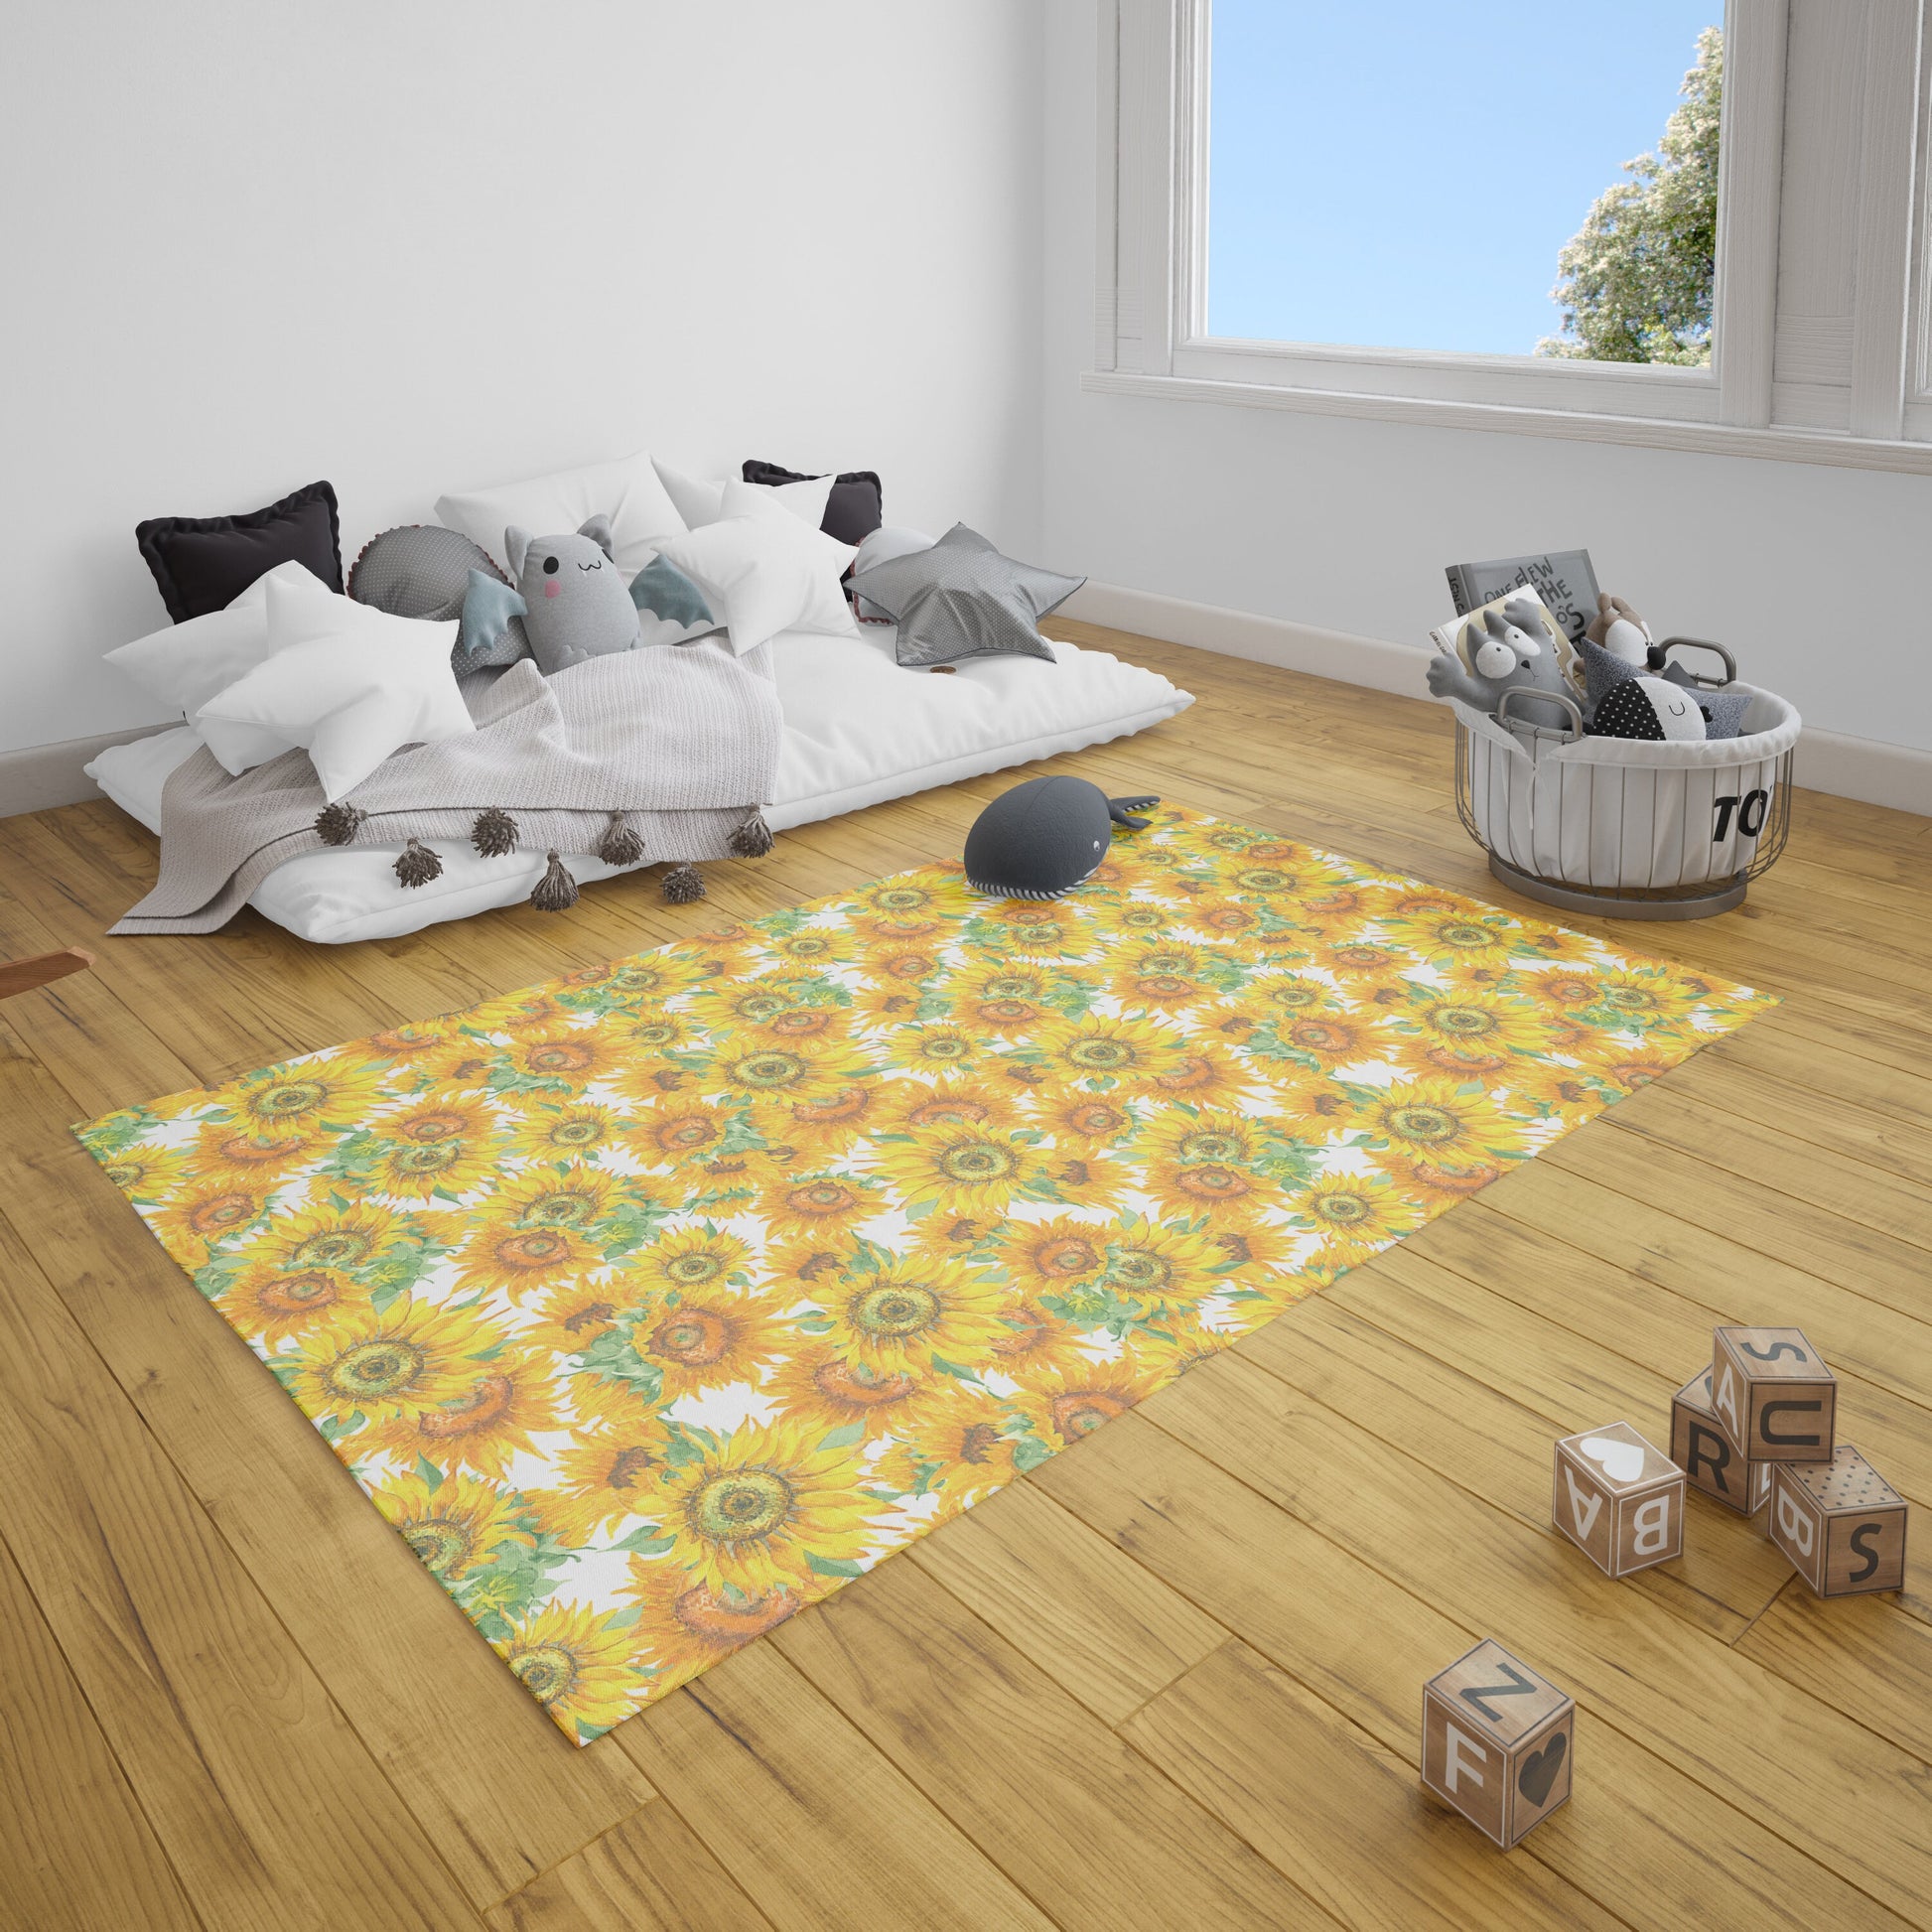 Sunflowers Rug yellow colorful floral rugs 2x3 3x5 4x6 5x7 8x10